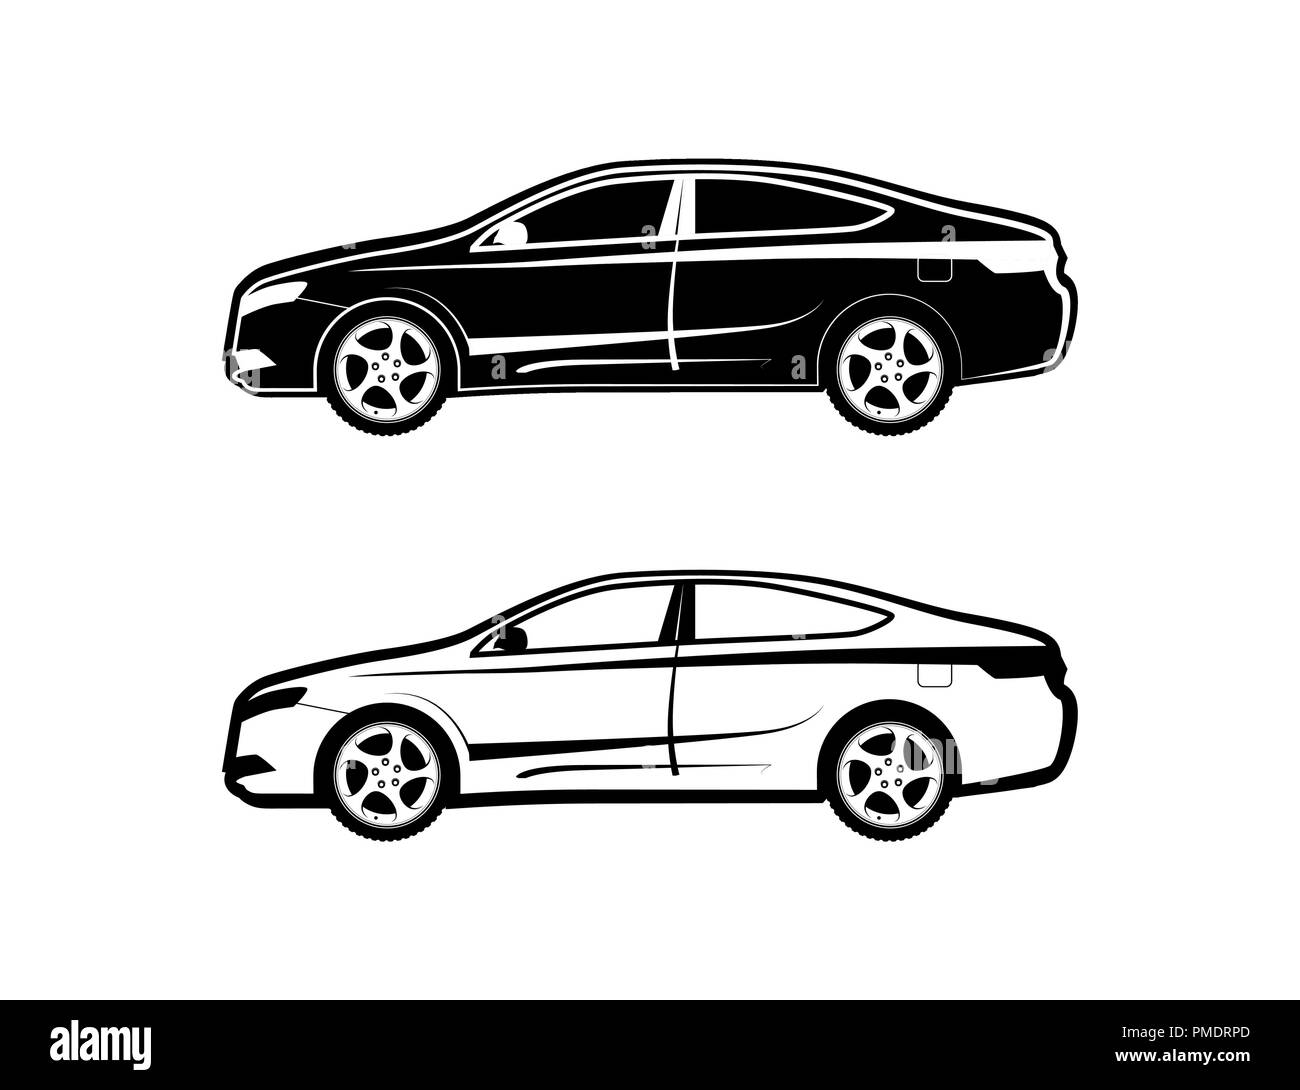 Sedan car Icon set from the side view in black and white Stock Vector